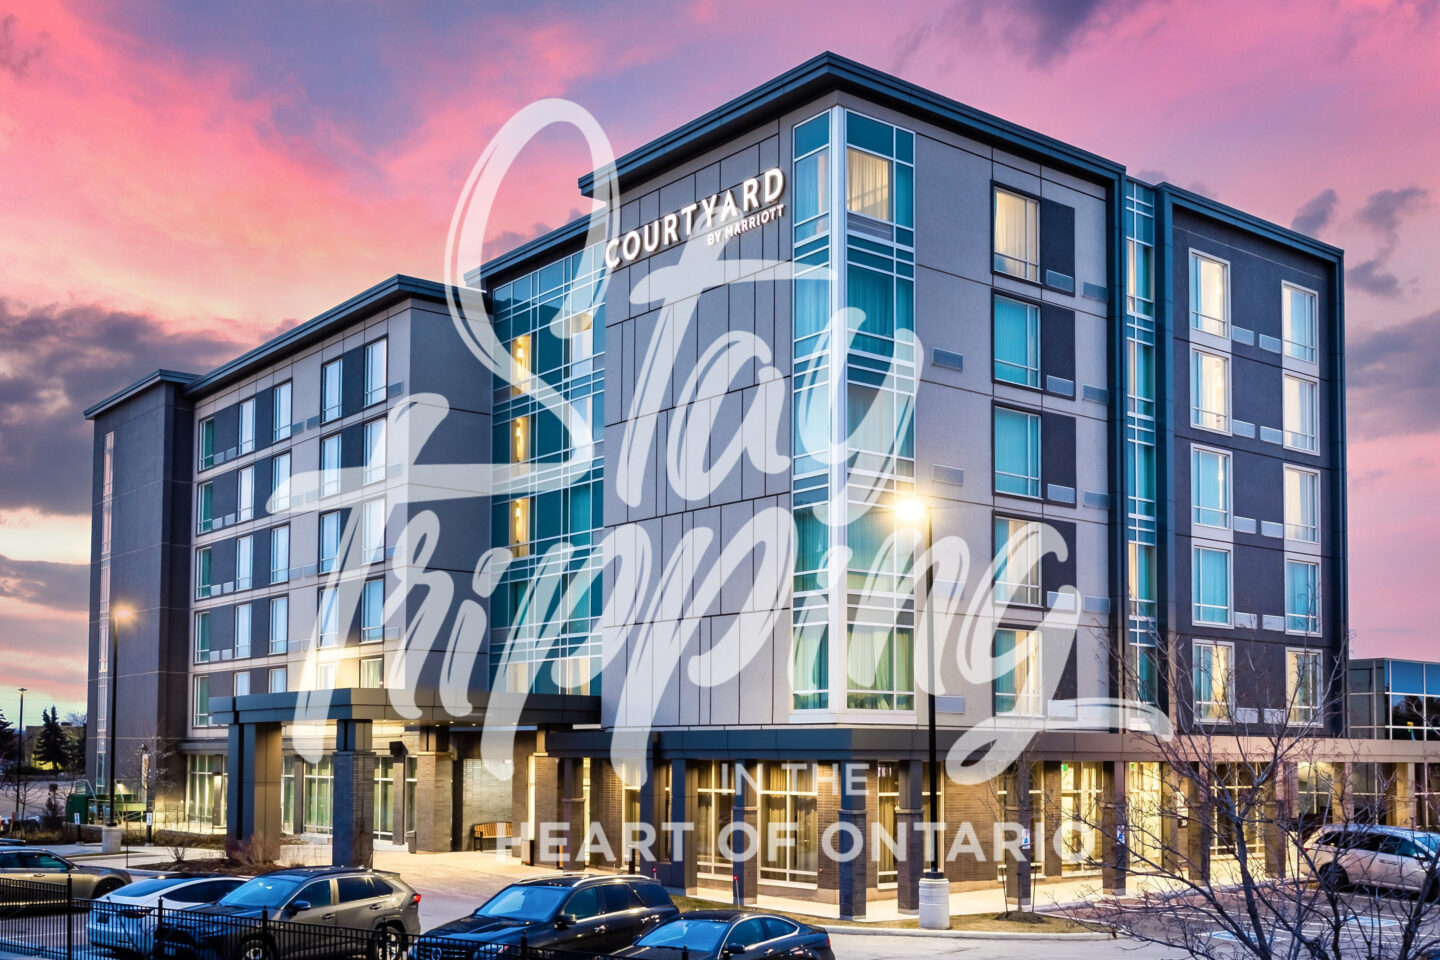 Staycation Package at Courtyard by Marriott Burlington